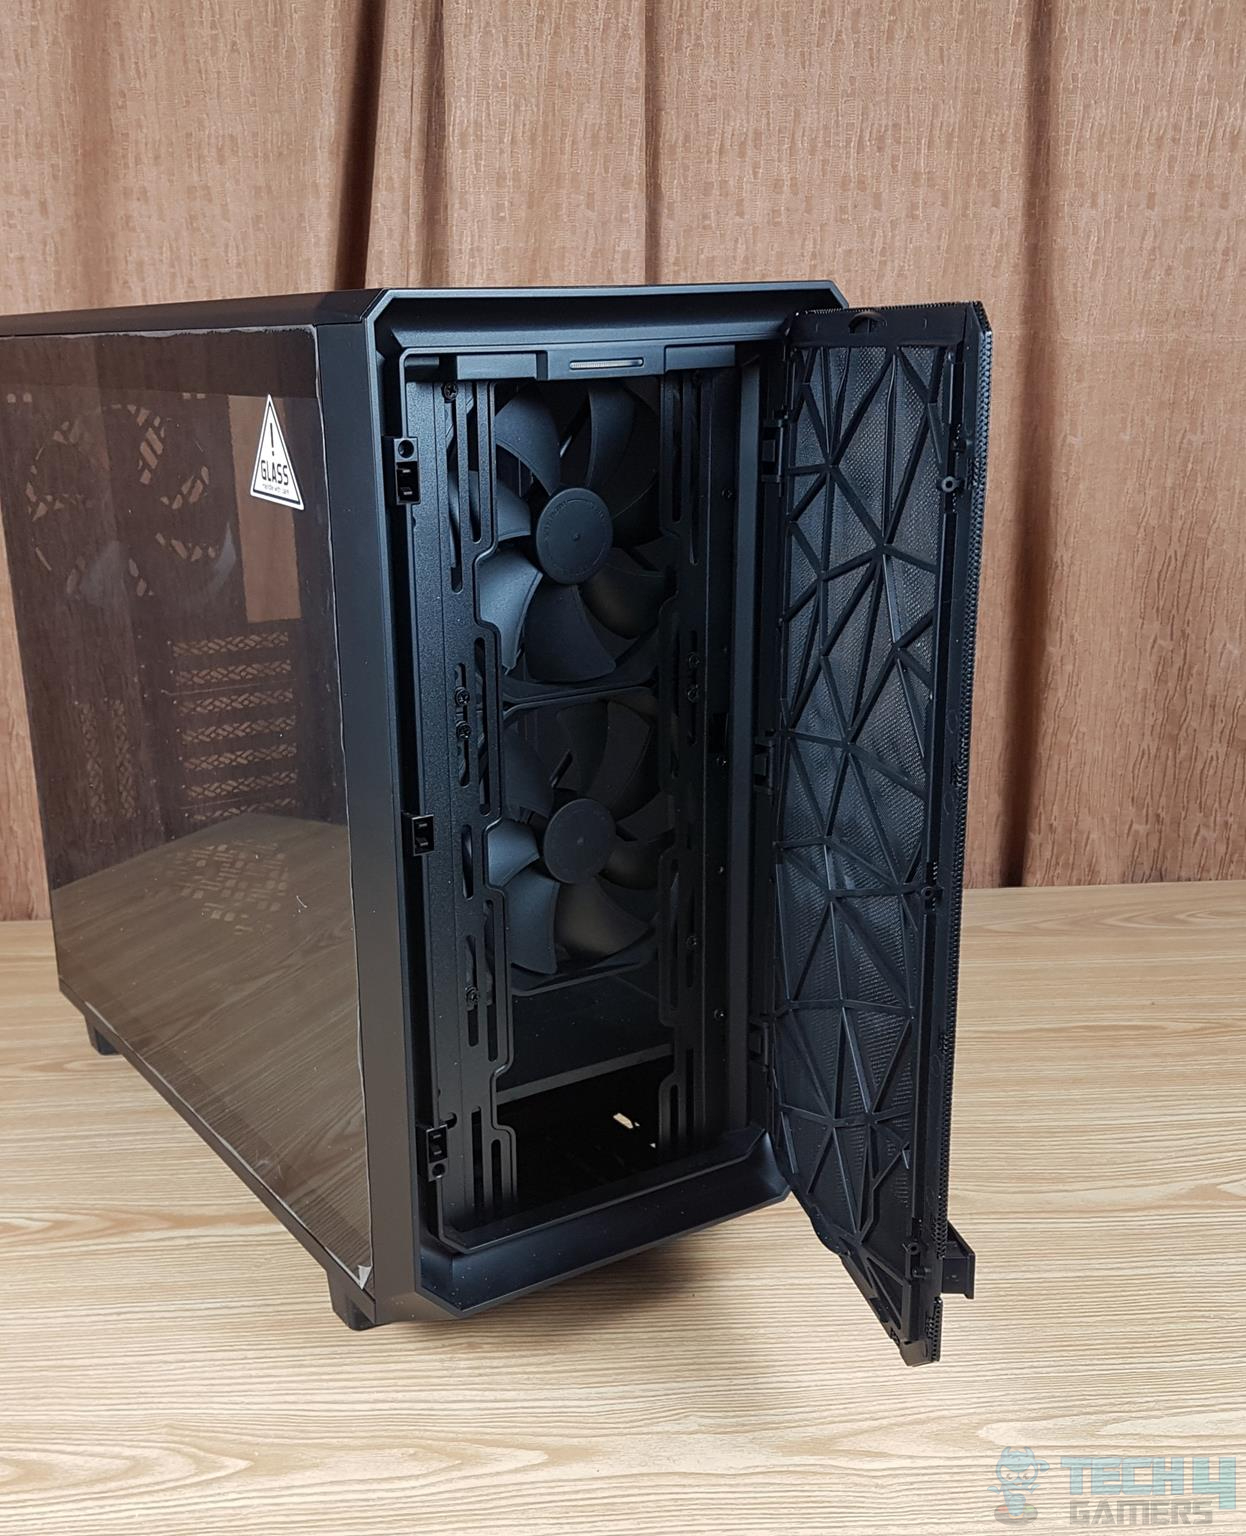 Fractal Design Meshify 2 — Opening the front cover